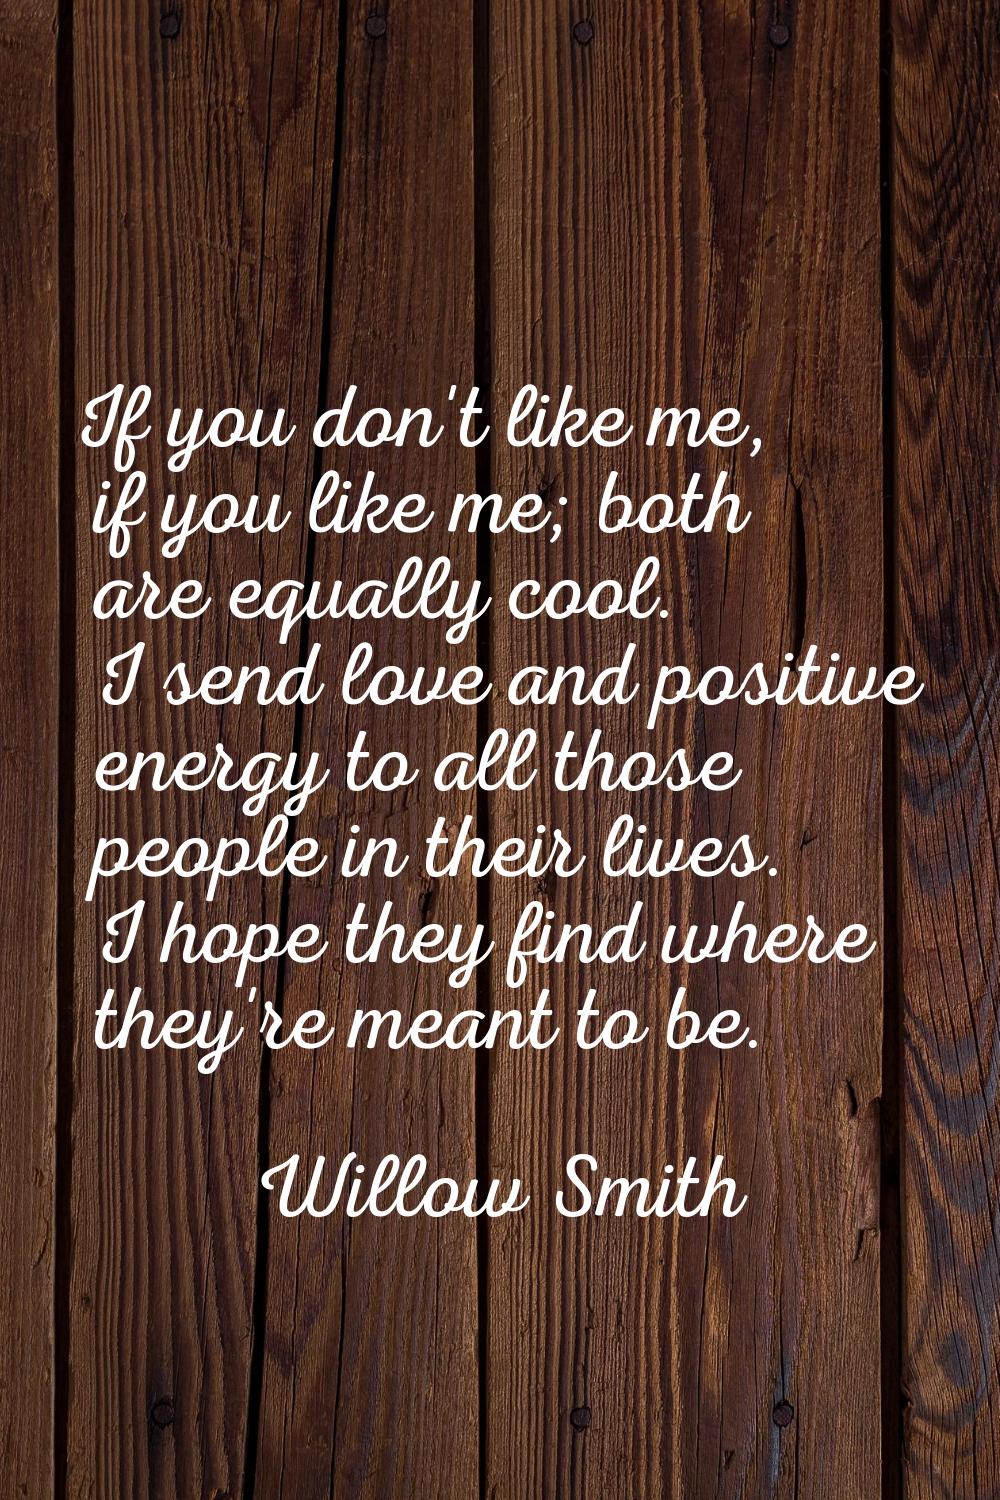 If you don't like me, if you like me; both are equally cool. I send love and positive energy to all